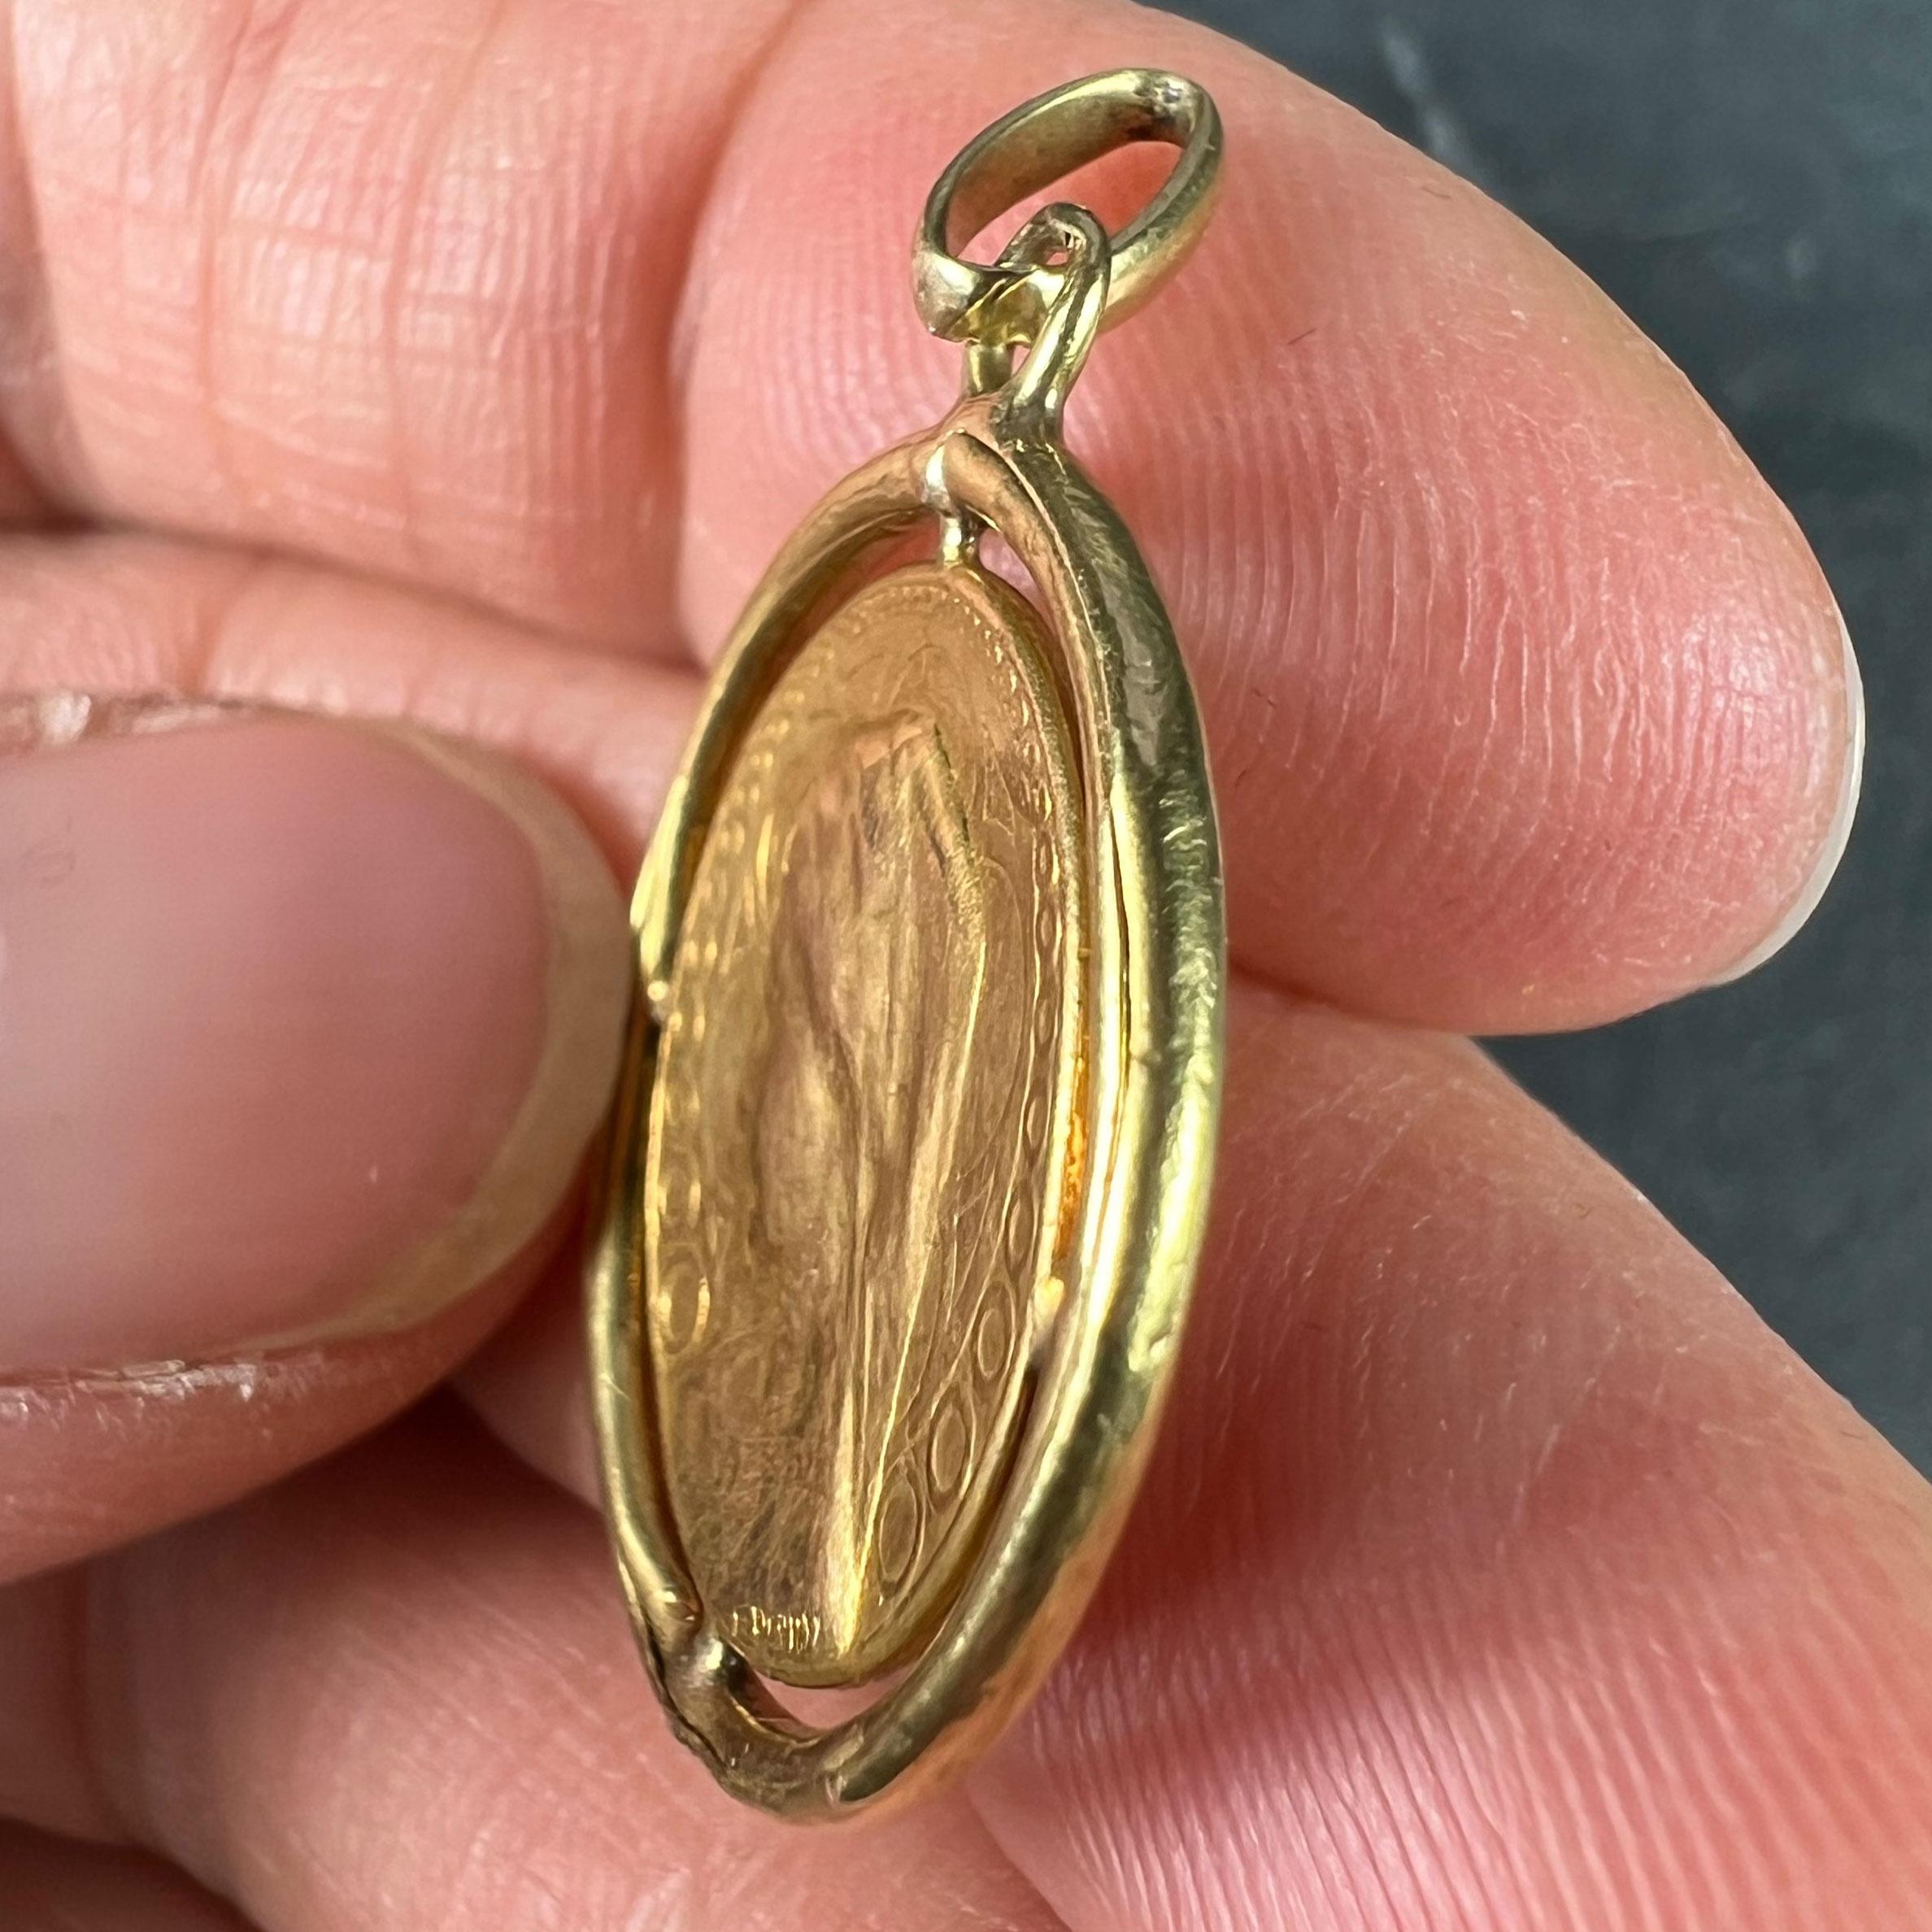 French Dropsy Virgin Mary Virgo Gloriosa 18K Yellow Gold Medal Pendant For Sale 3